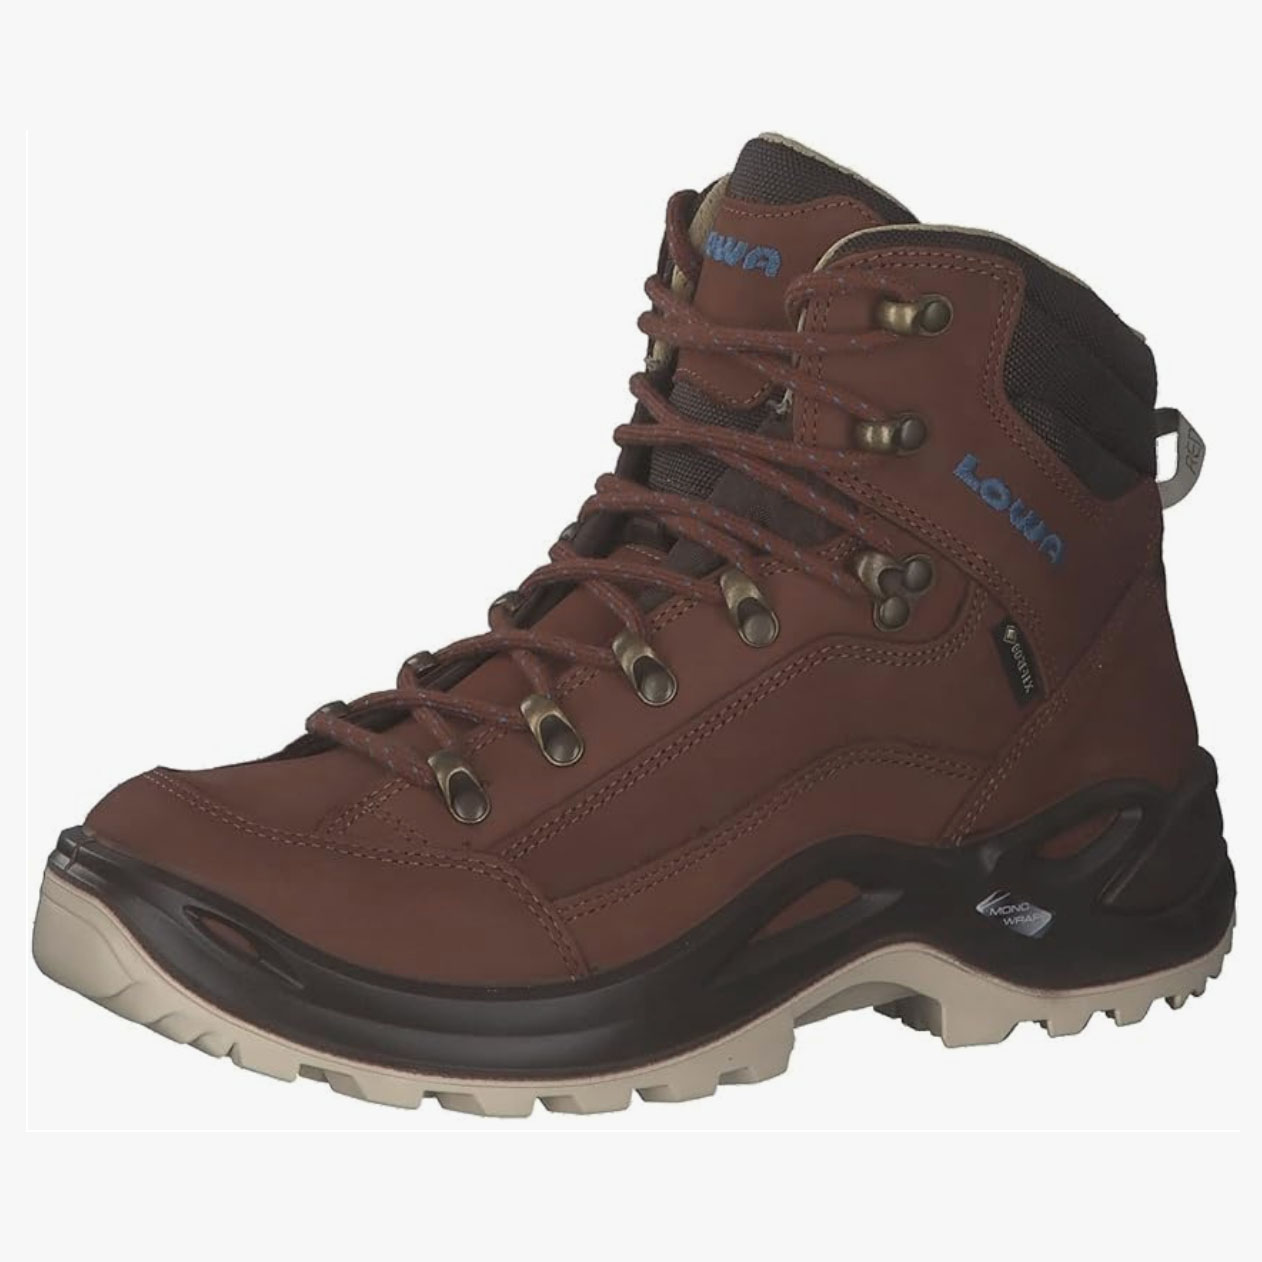 Brown leather LOWA Renegade Gtx Mid Hiking Boots